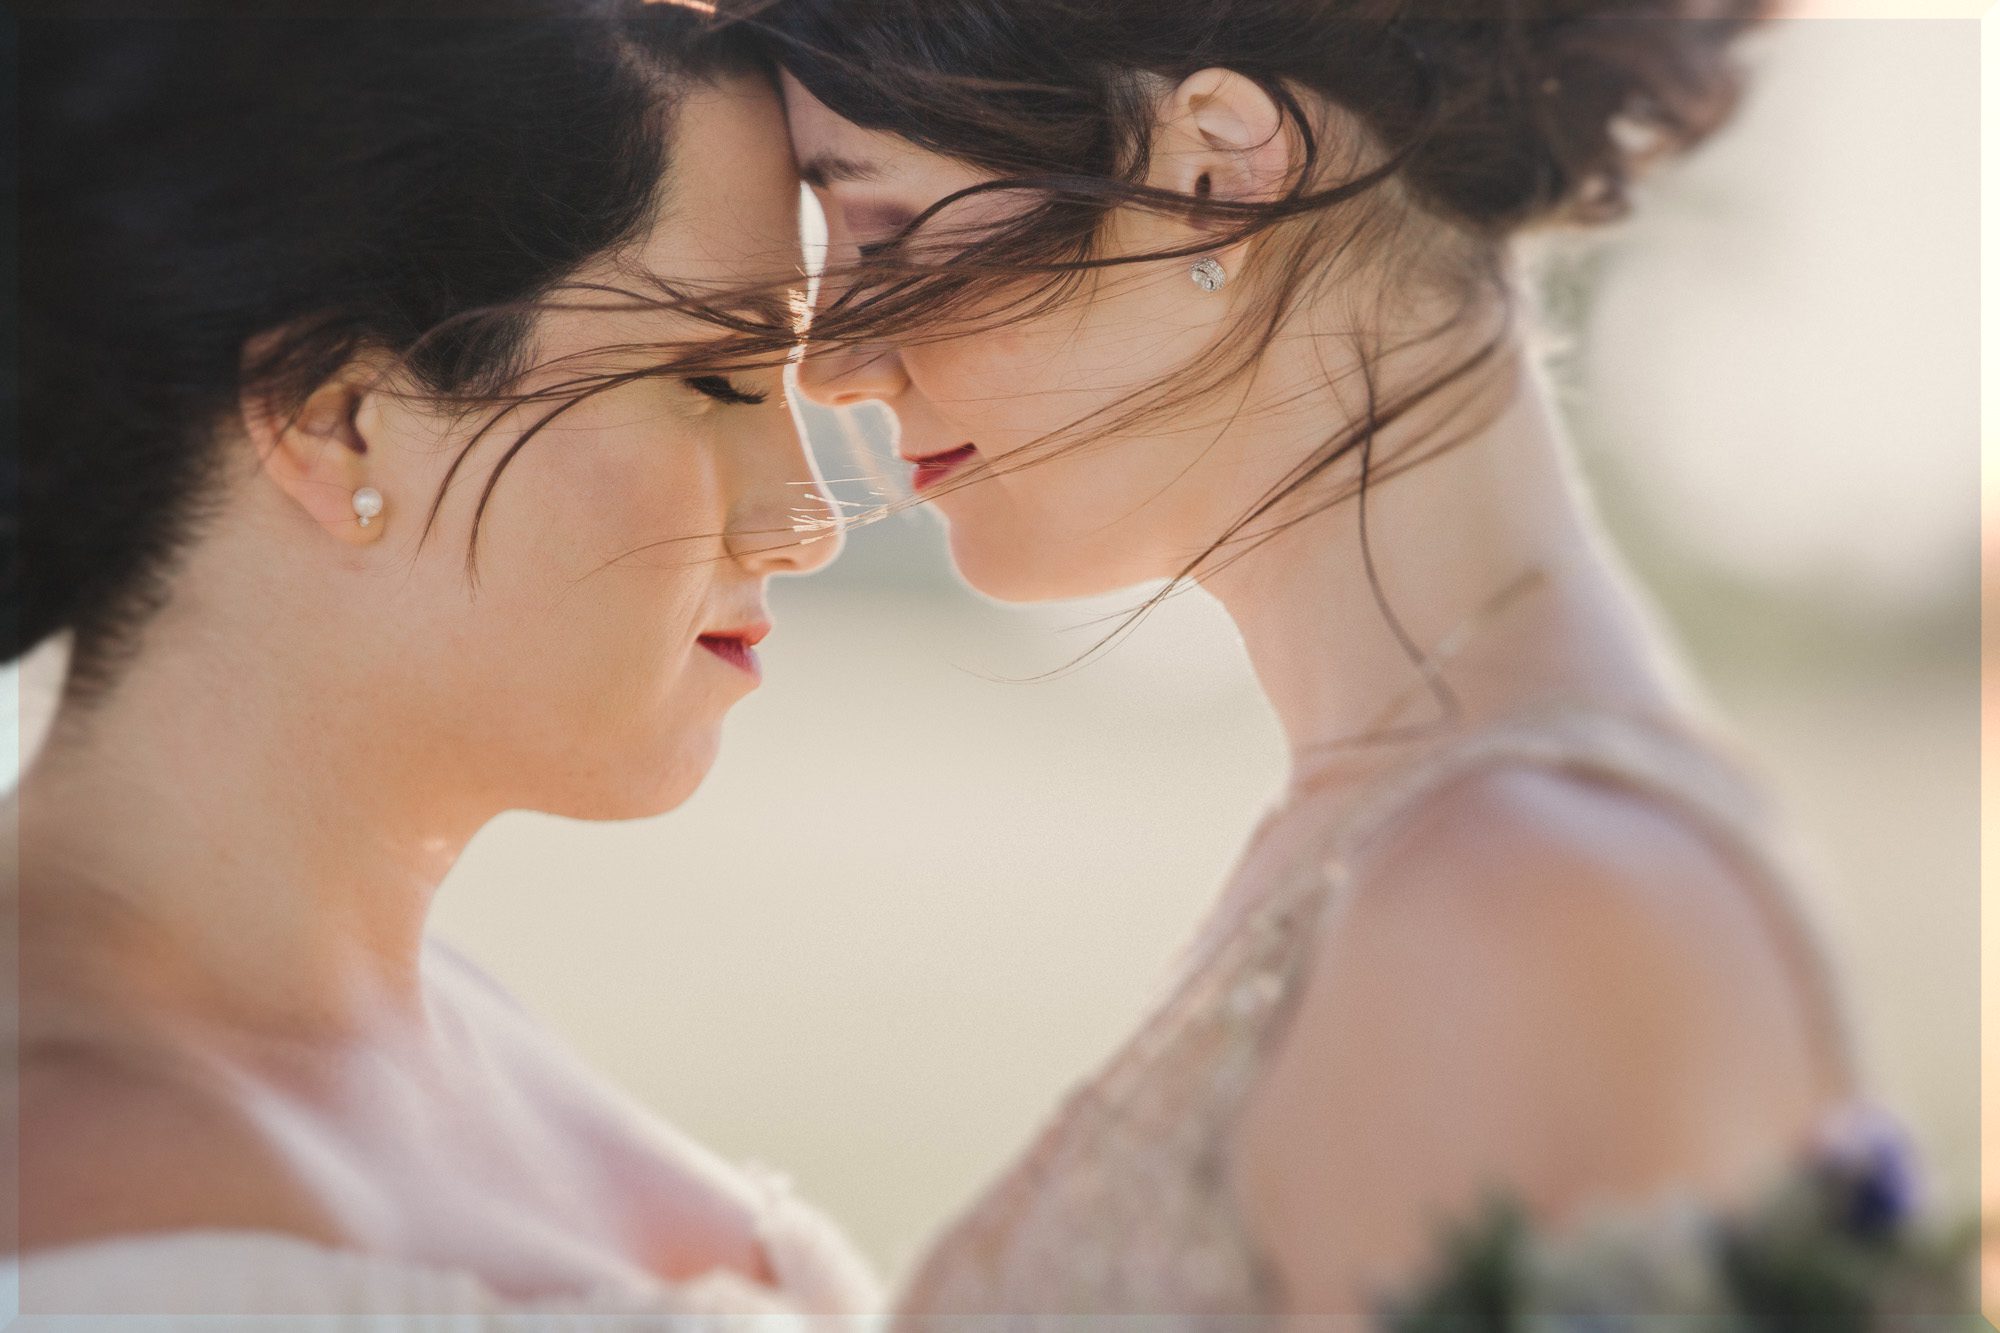 lesbian couple in white wedding dresses lean their foreheads against each other as the wind blows their hair gently on their wedding day